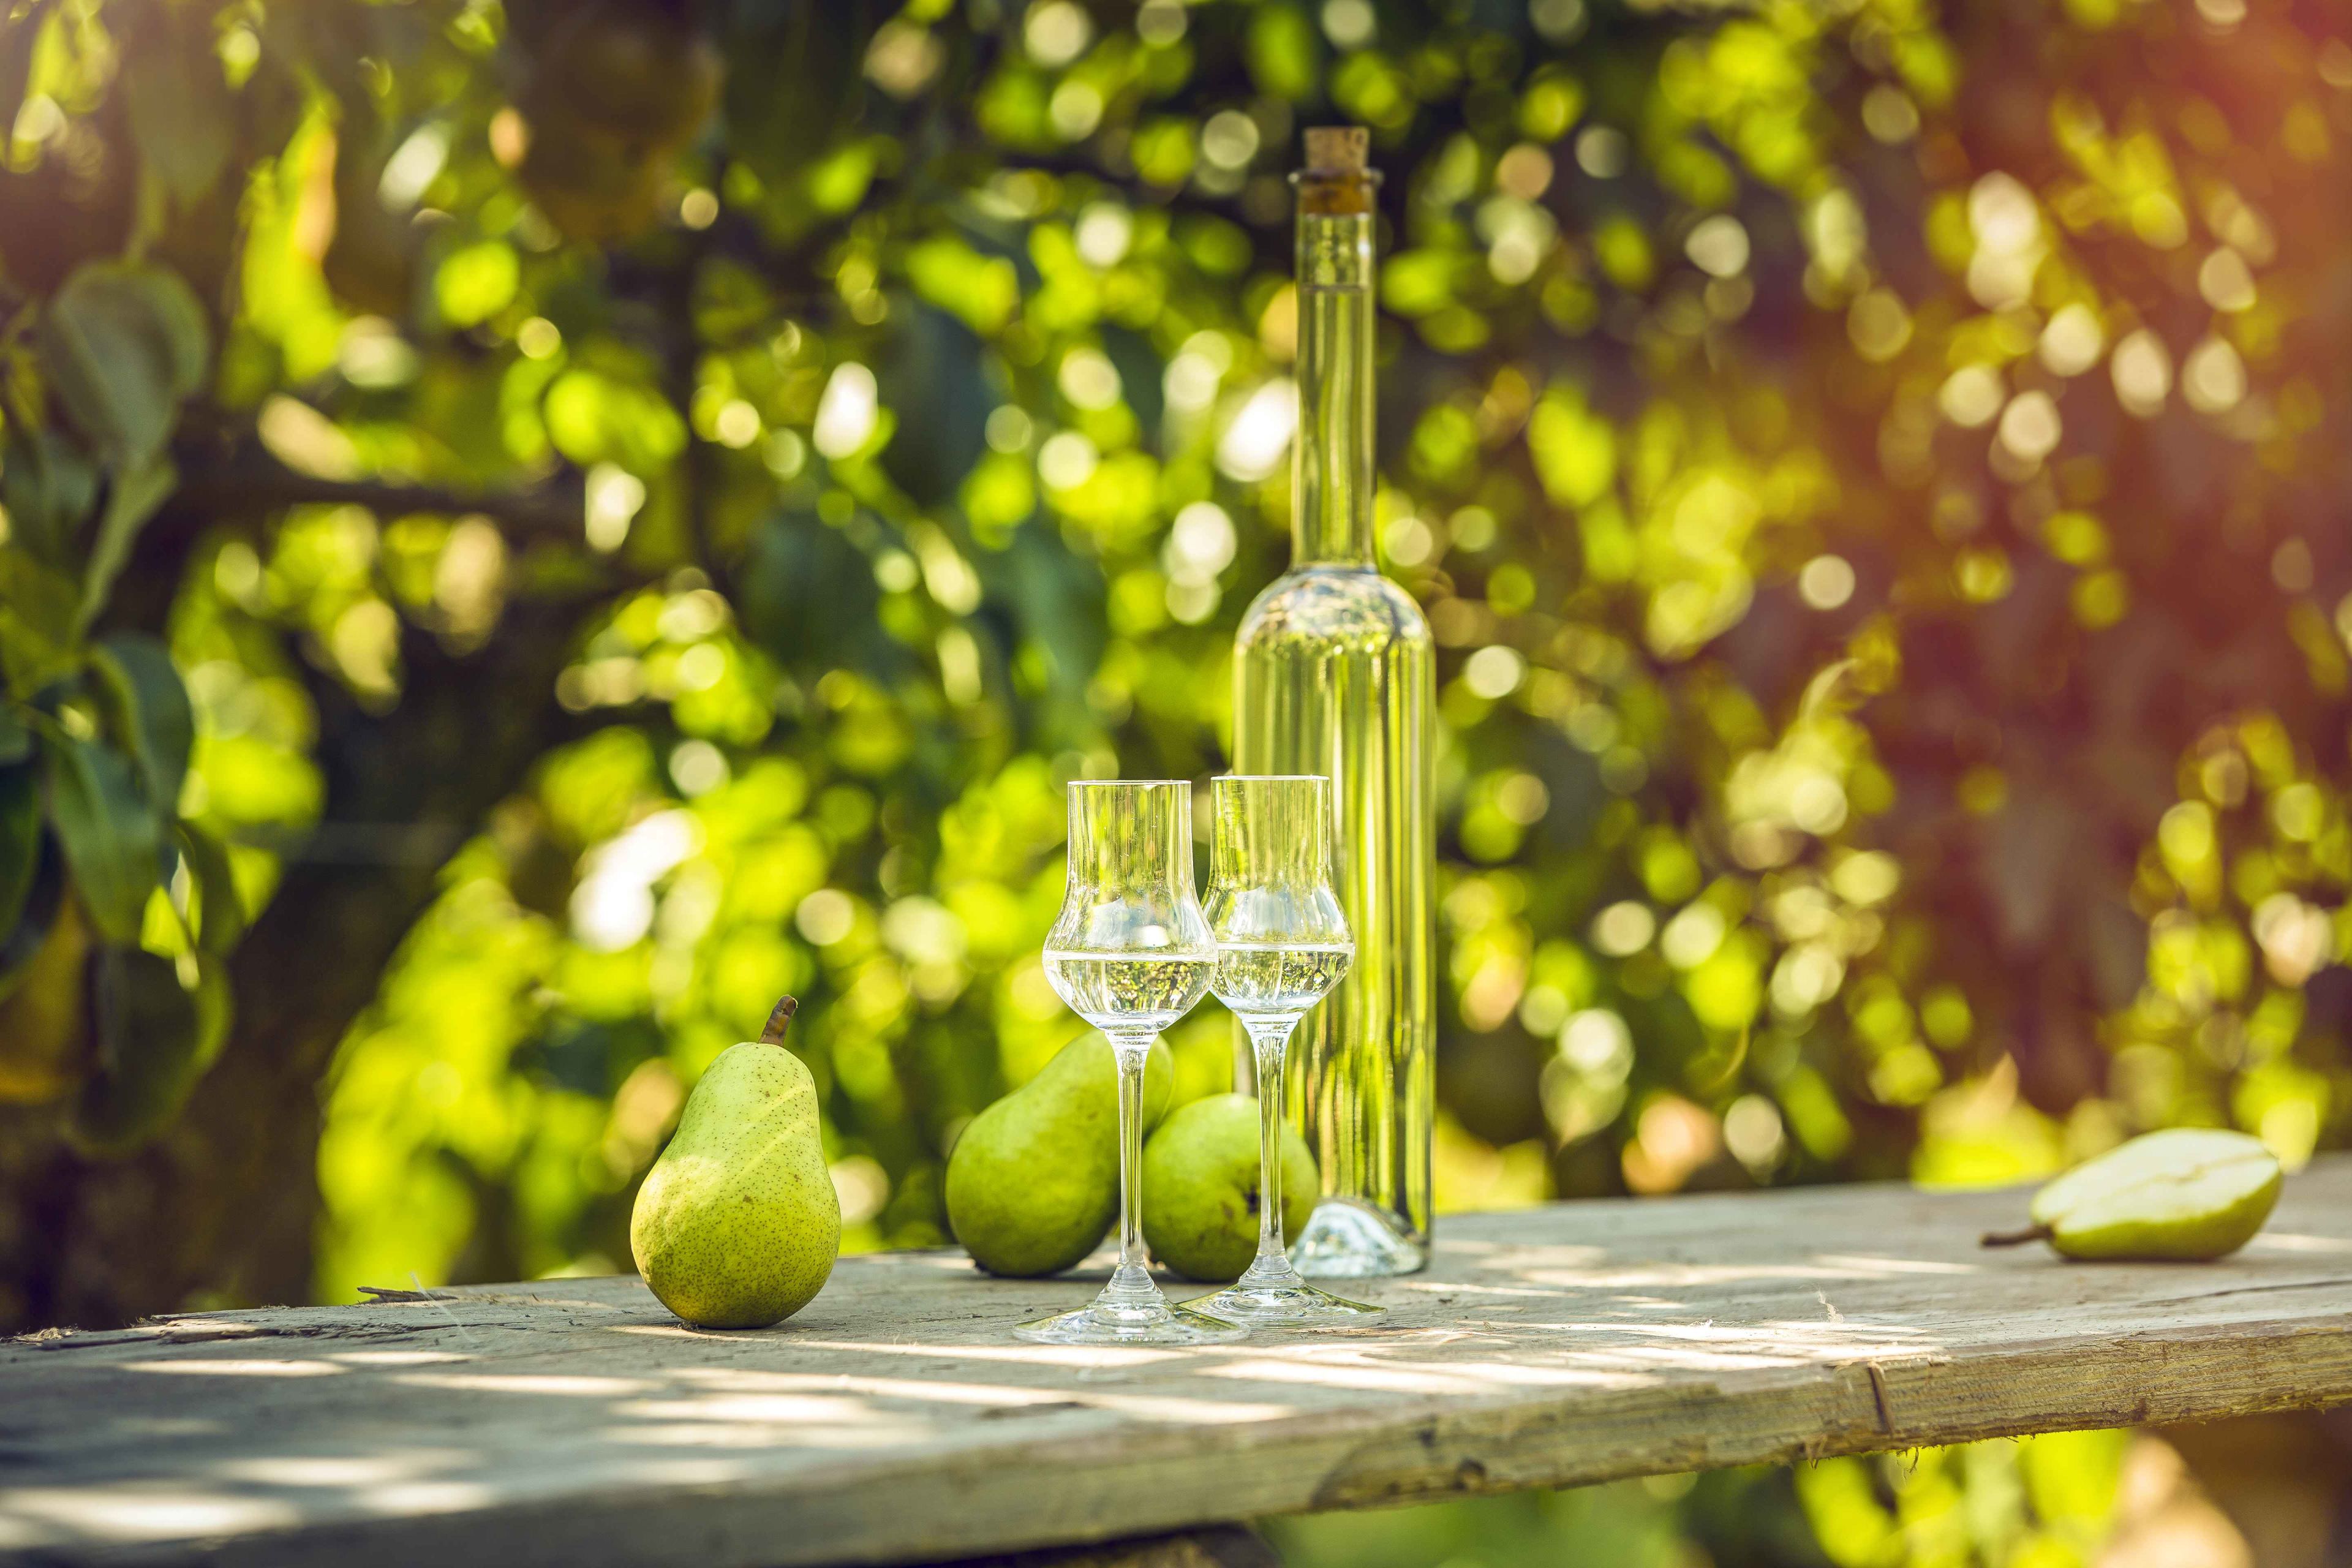 The pears are distilled and transformed into Williamine eau-de-vie. Valais Wallis Schweiz Suisse